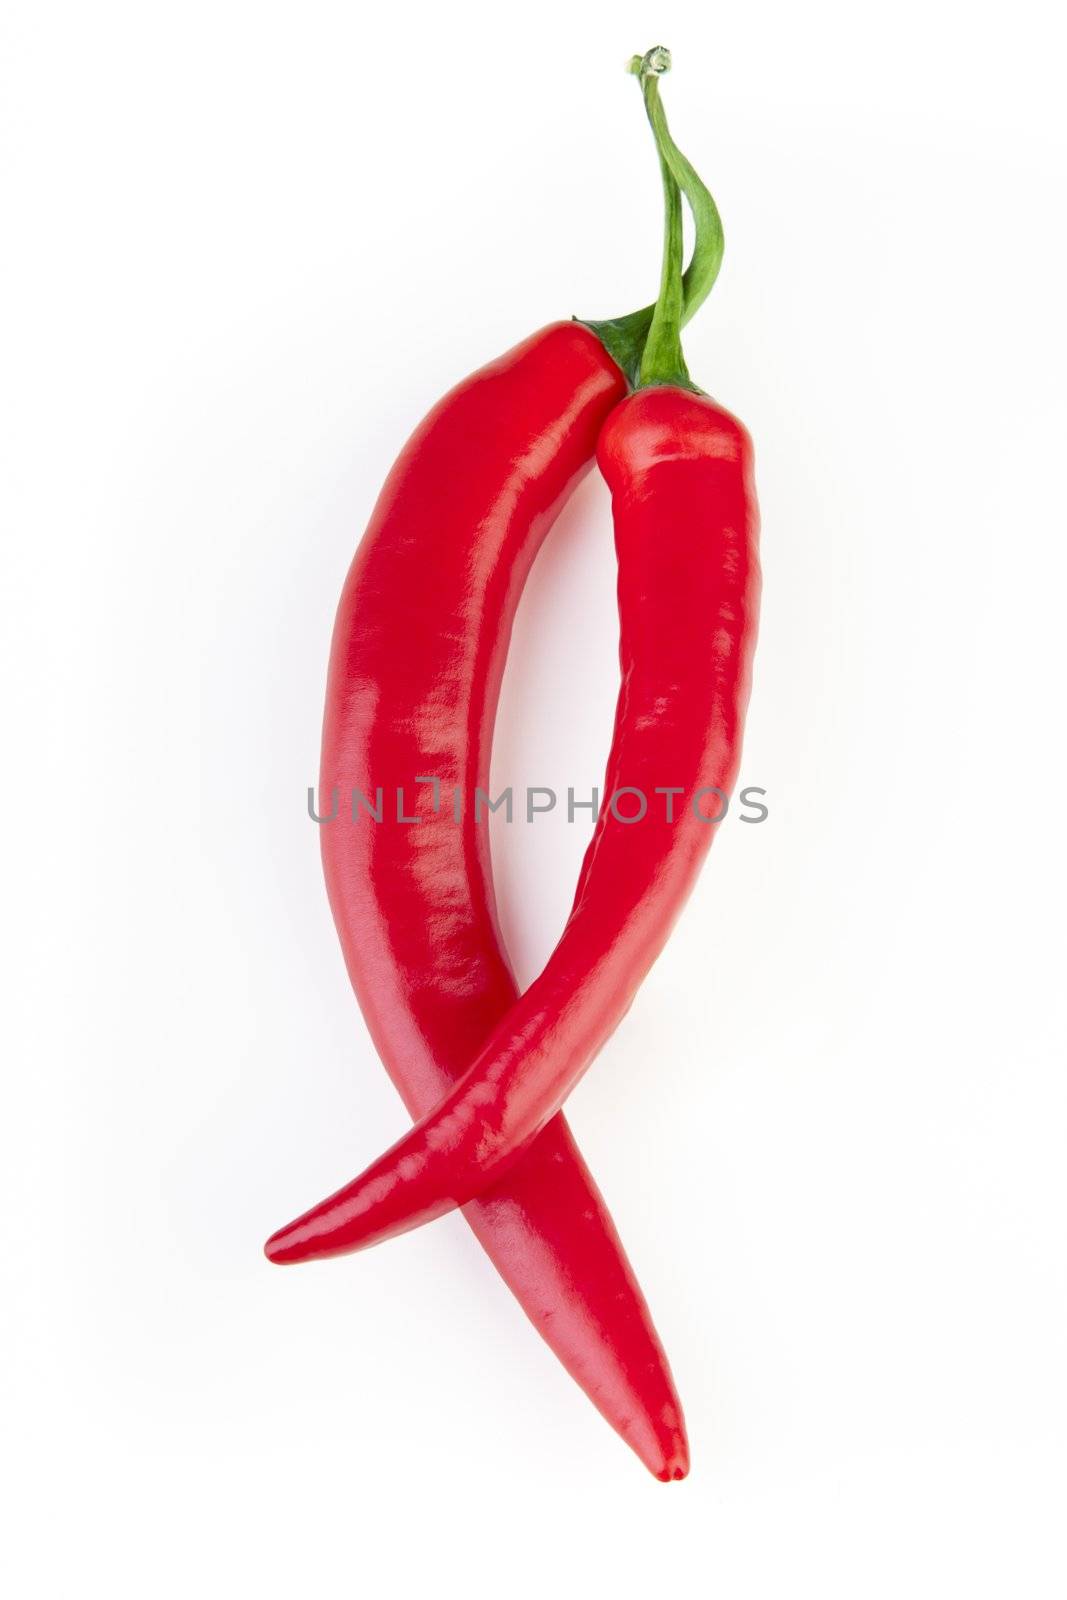 Two red hot peppers on white background